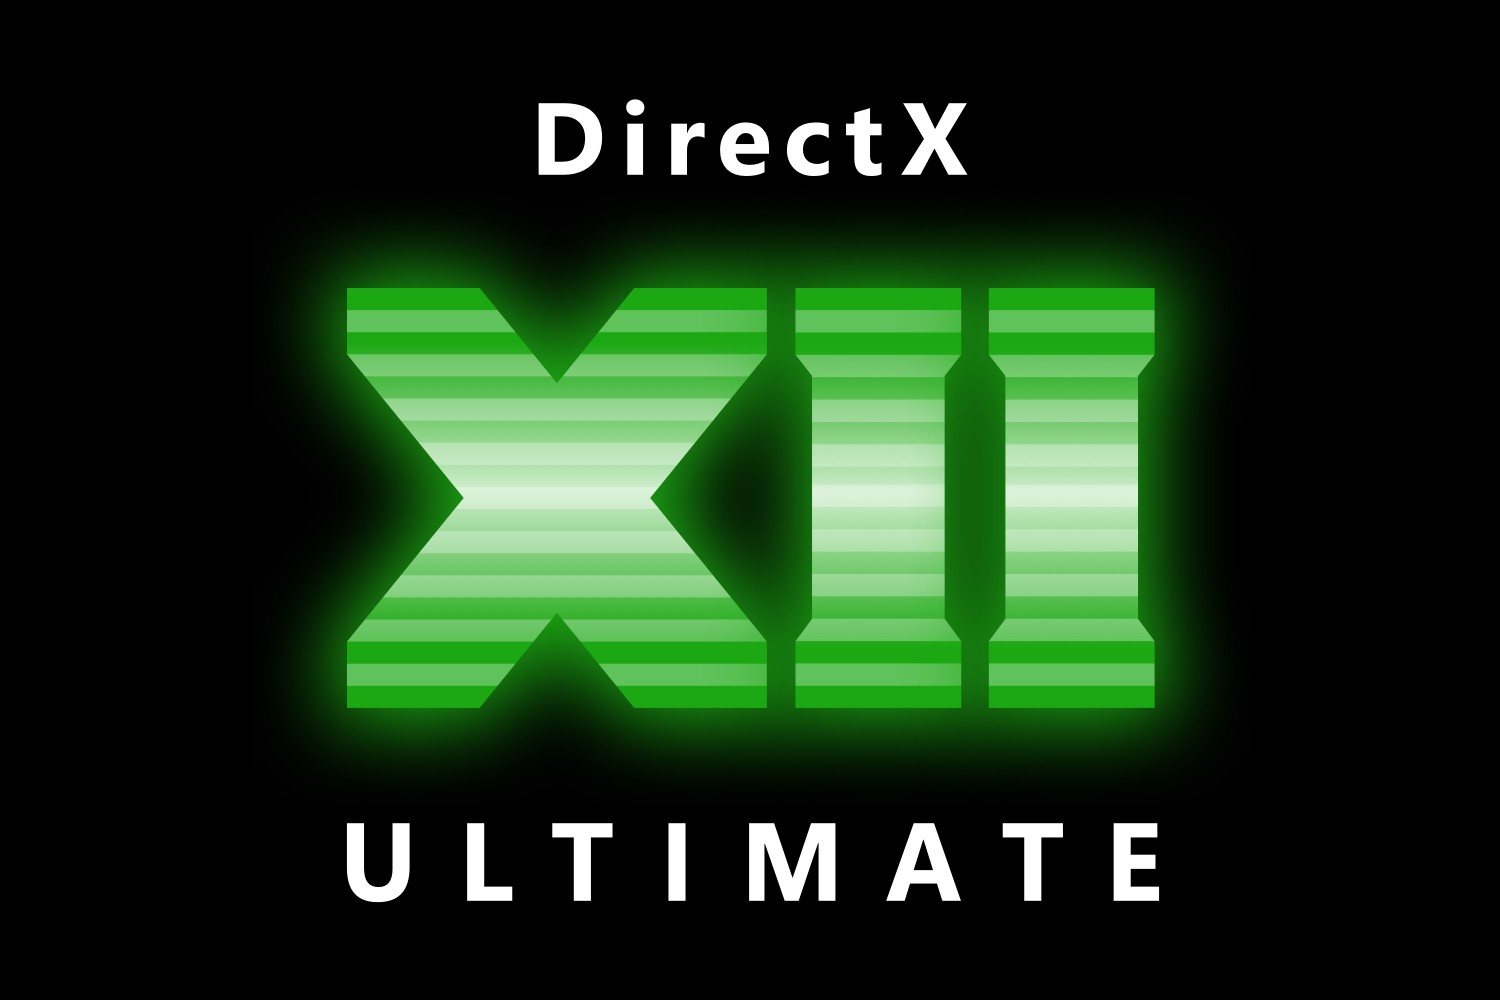 Direct X12 Ultimate not enabled on Windows 11 - Microsoft